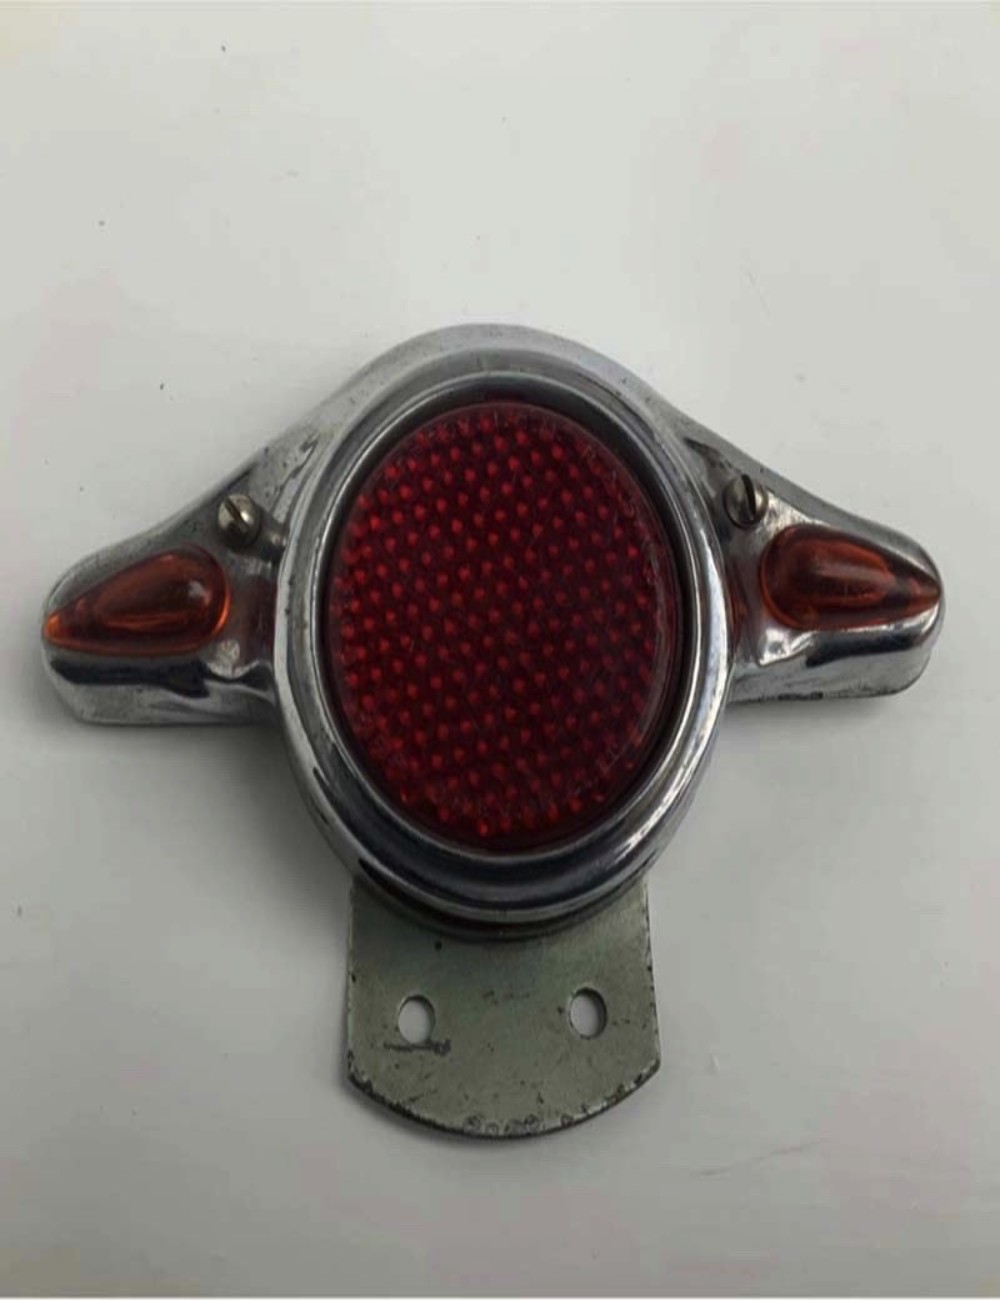 Light accessory for motorcycles and wasps